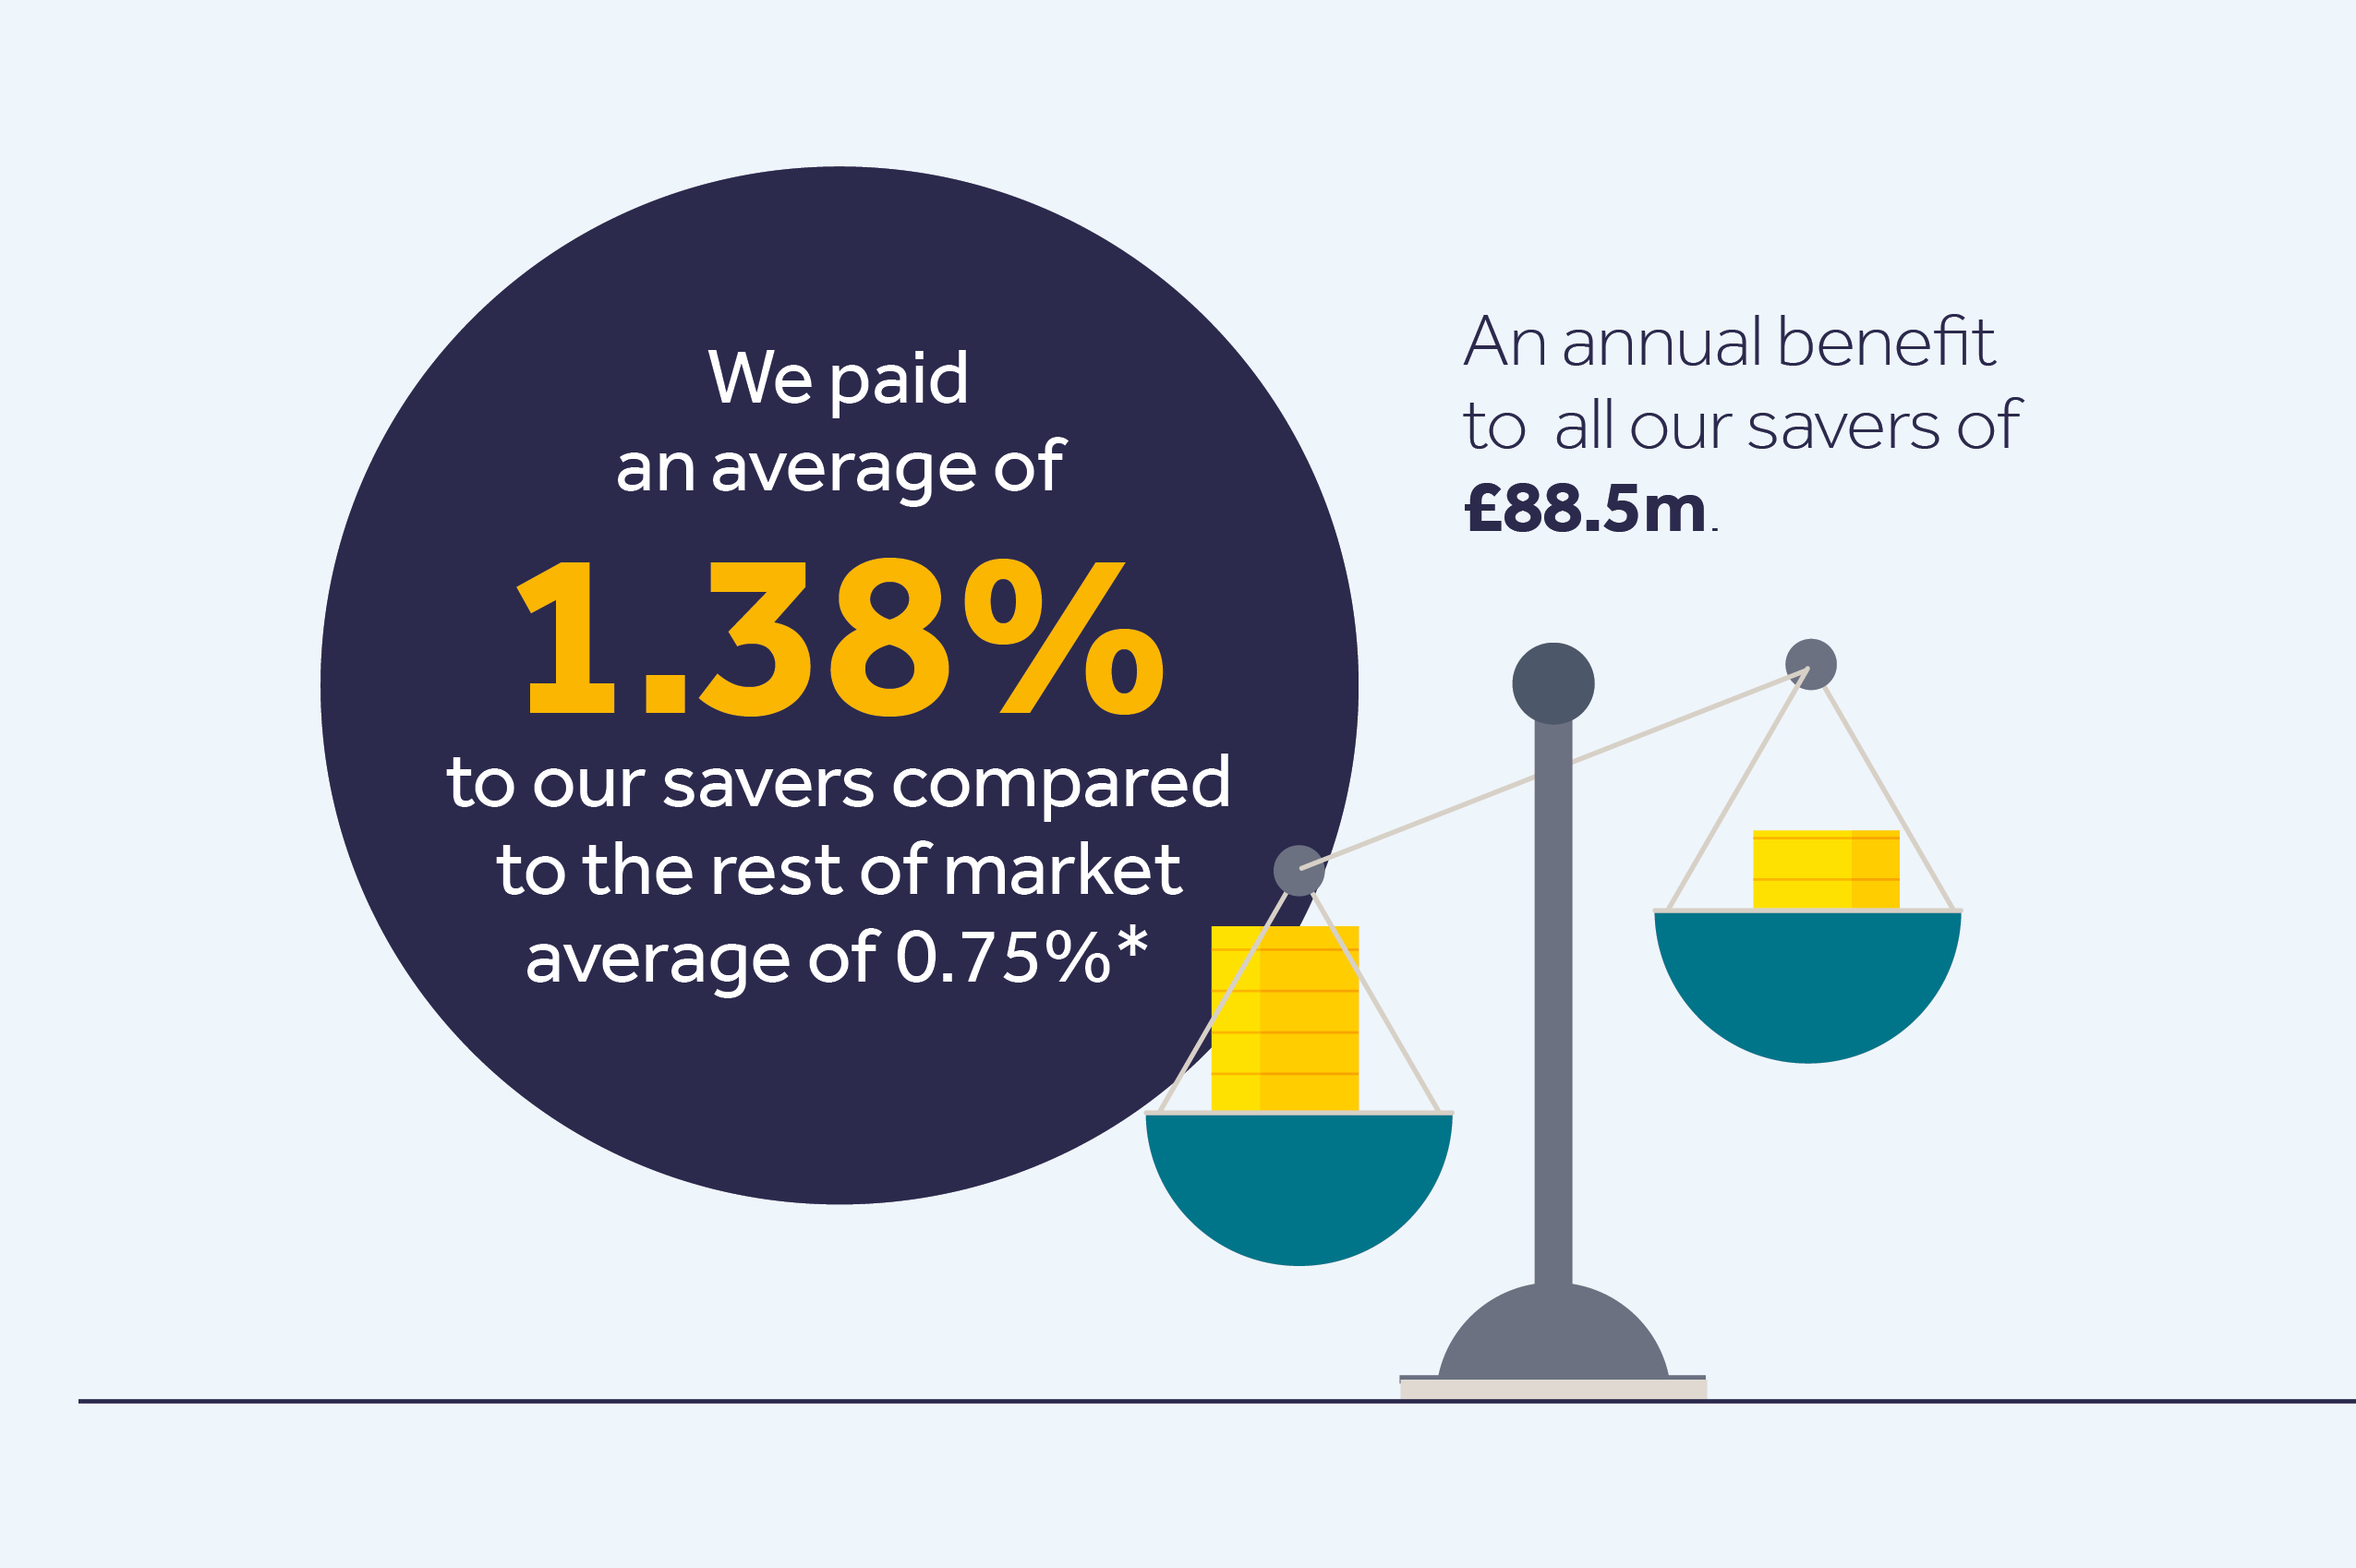 we paid an average of 1.38% to our savers compared to rest of market average of 0.75%